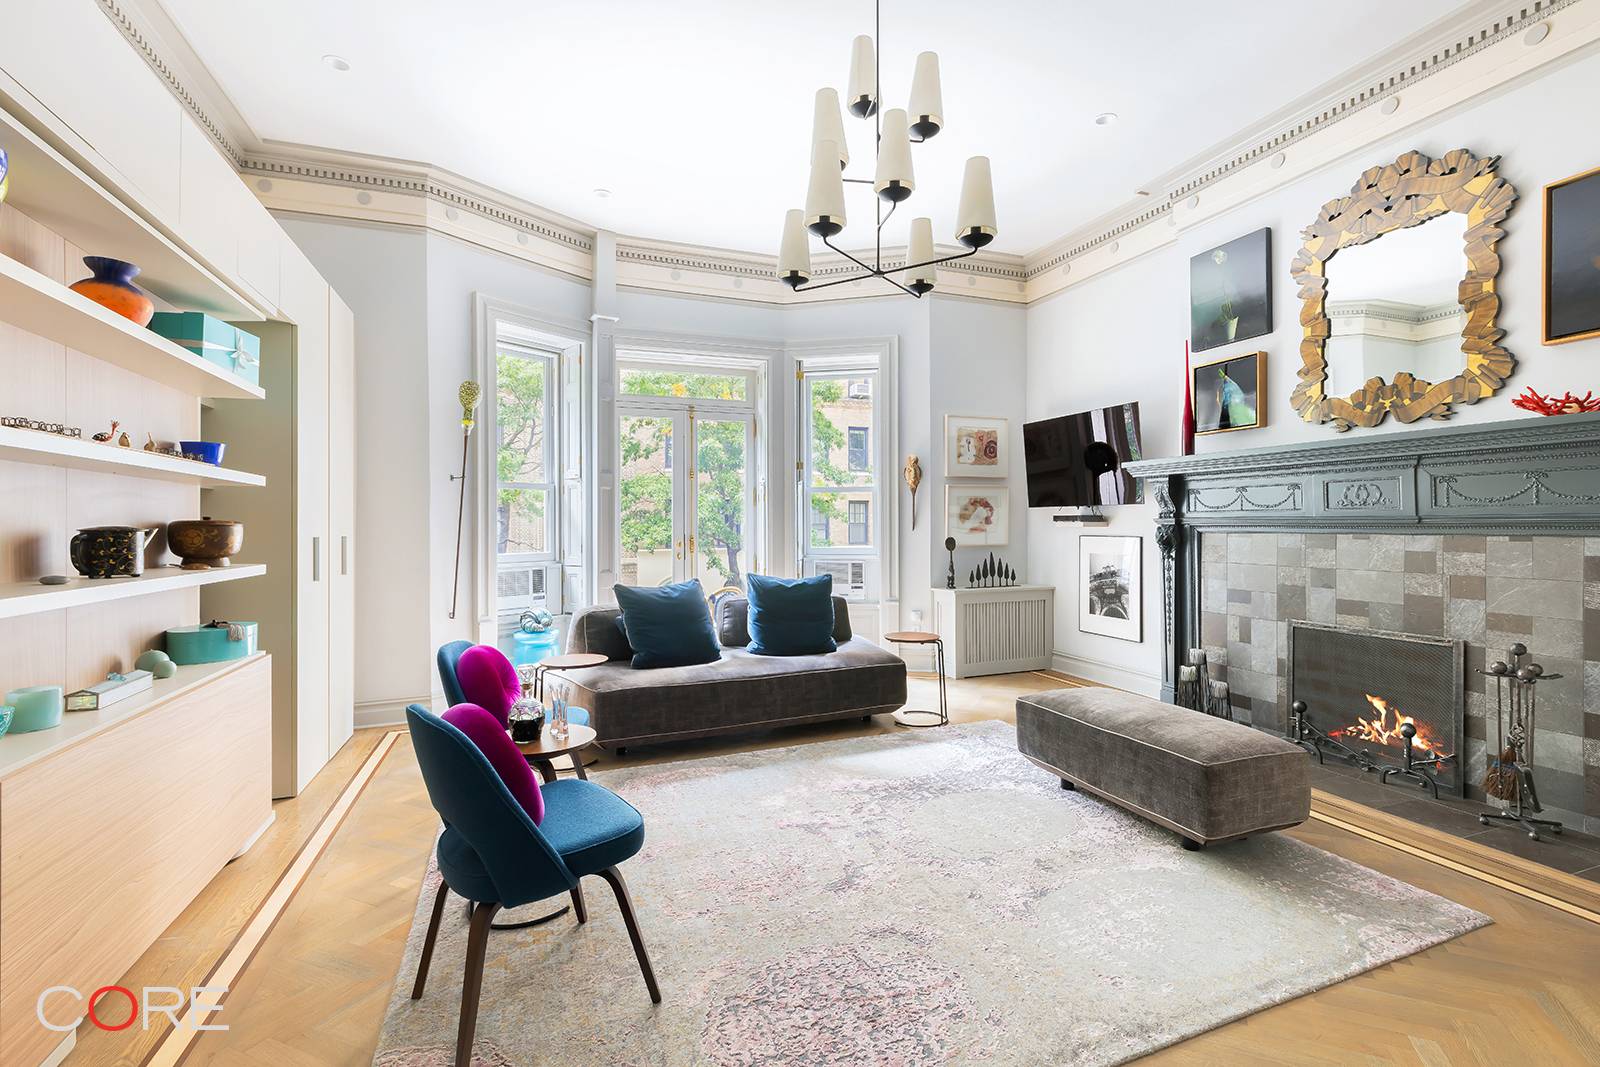 This is a meticulously curated gut renovation of the formal front parlor on the second floor of an elegant 1895 Renaissance Revival townhouse.